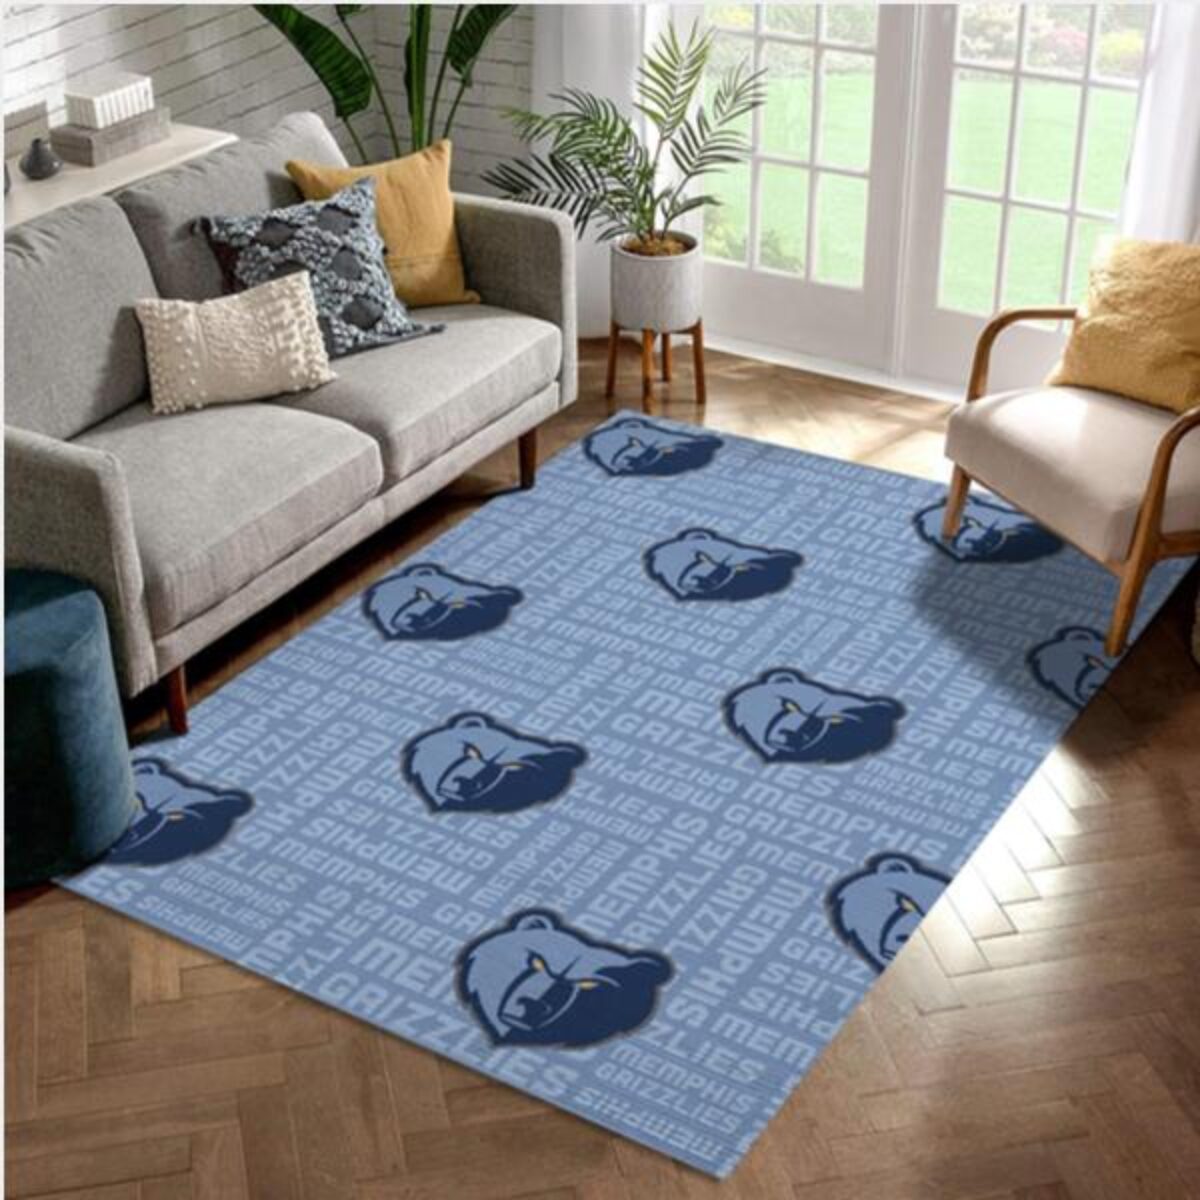 Memphis Grizzlies Patterns Reangle Area Rug Living Room Rug Home Decor -  Peto Rugs